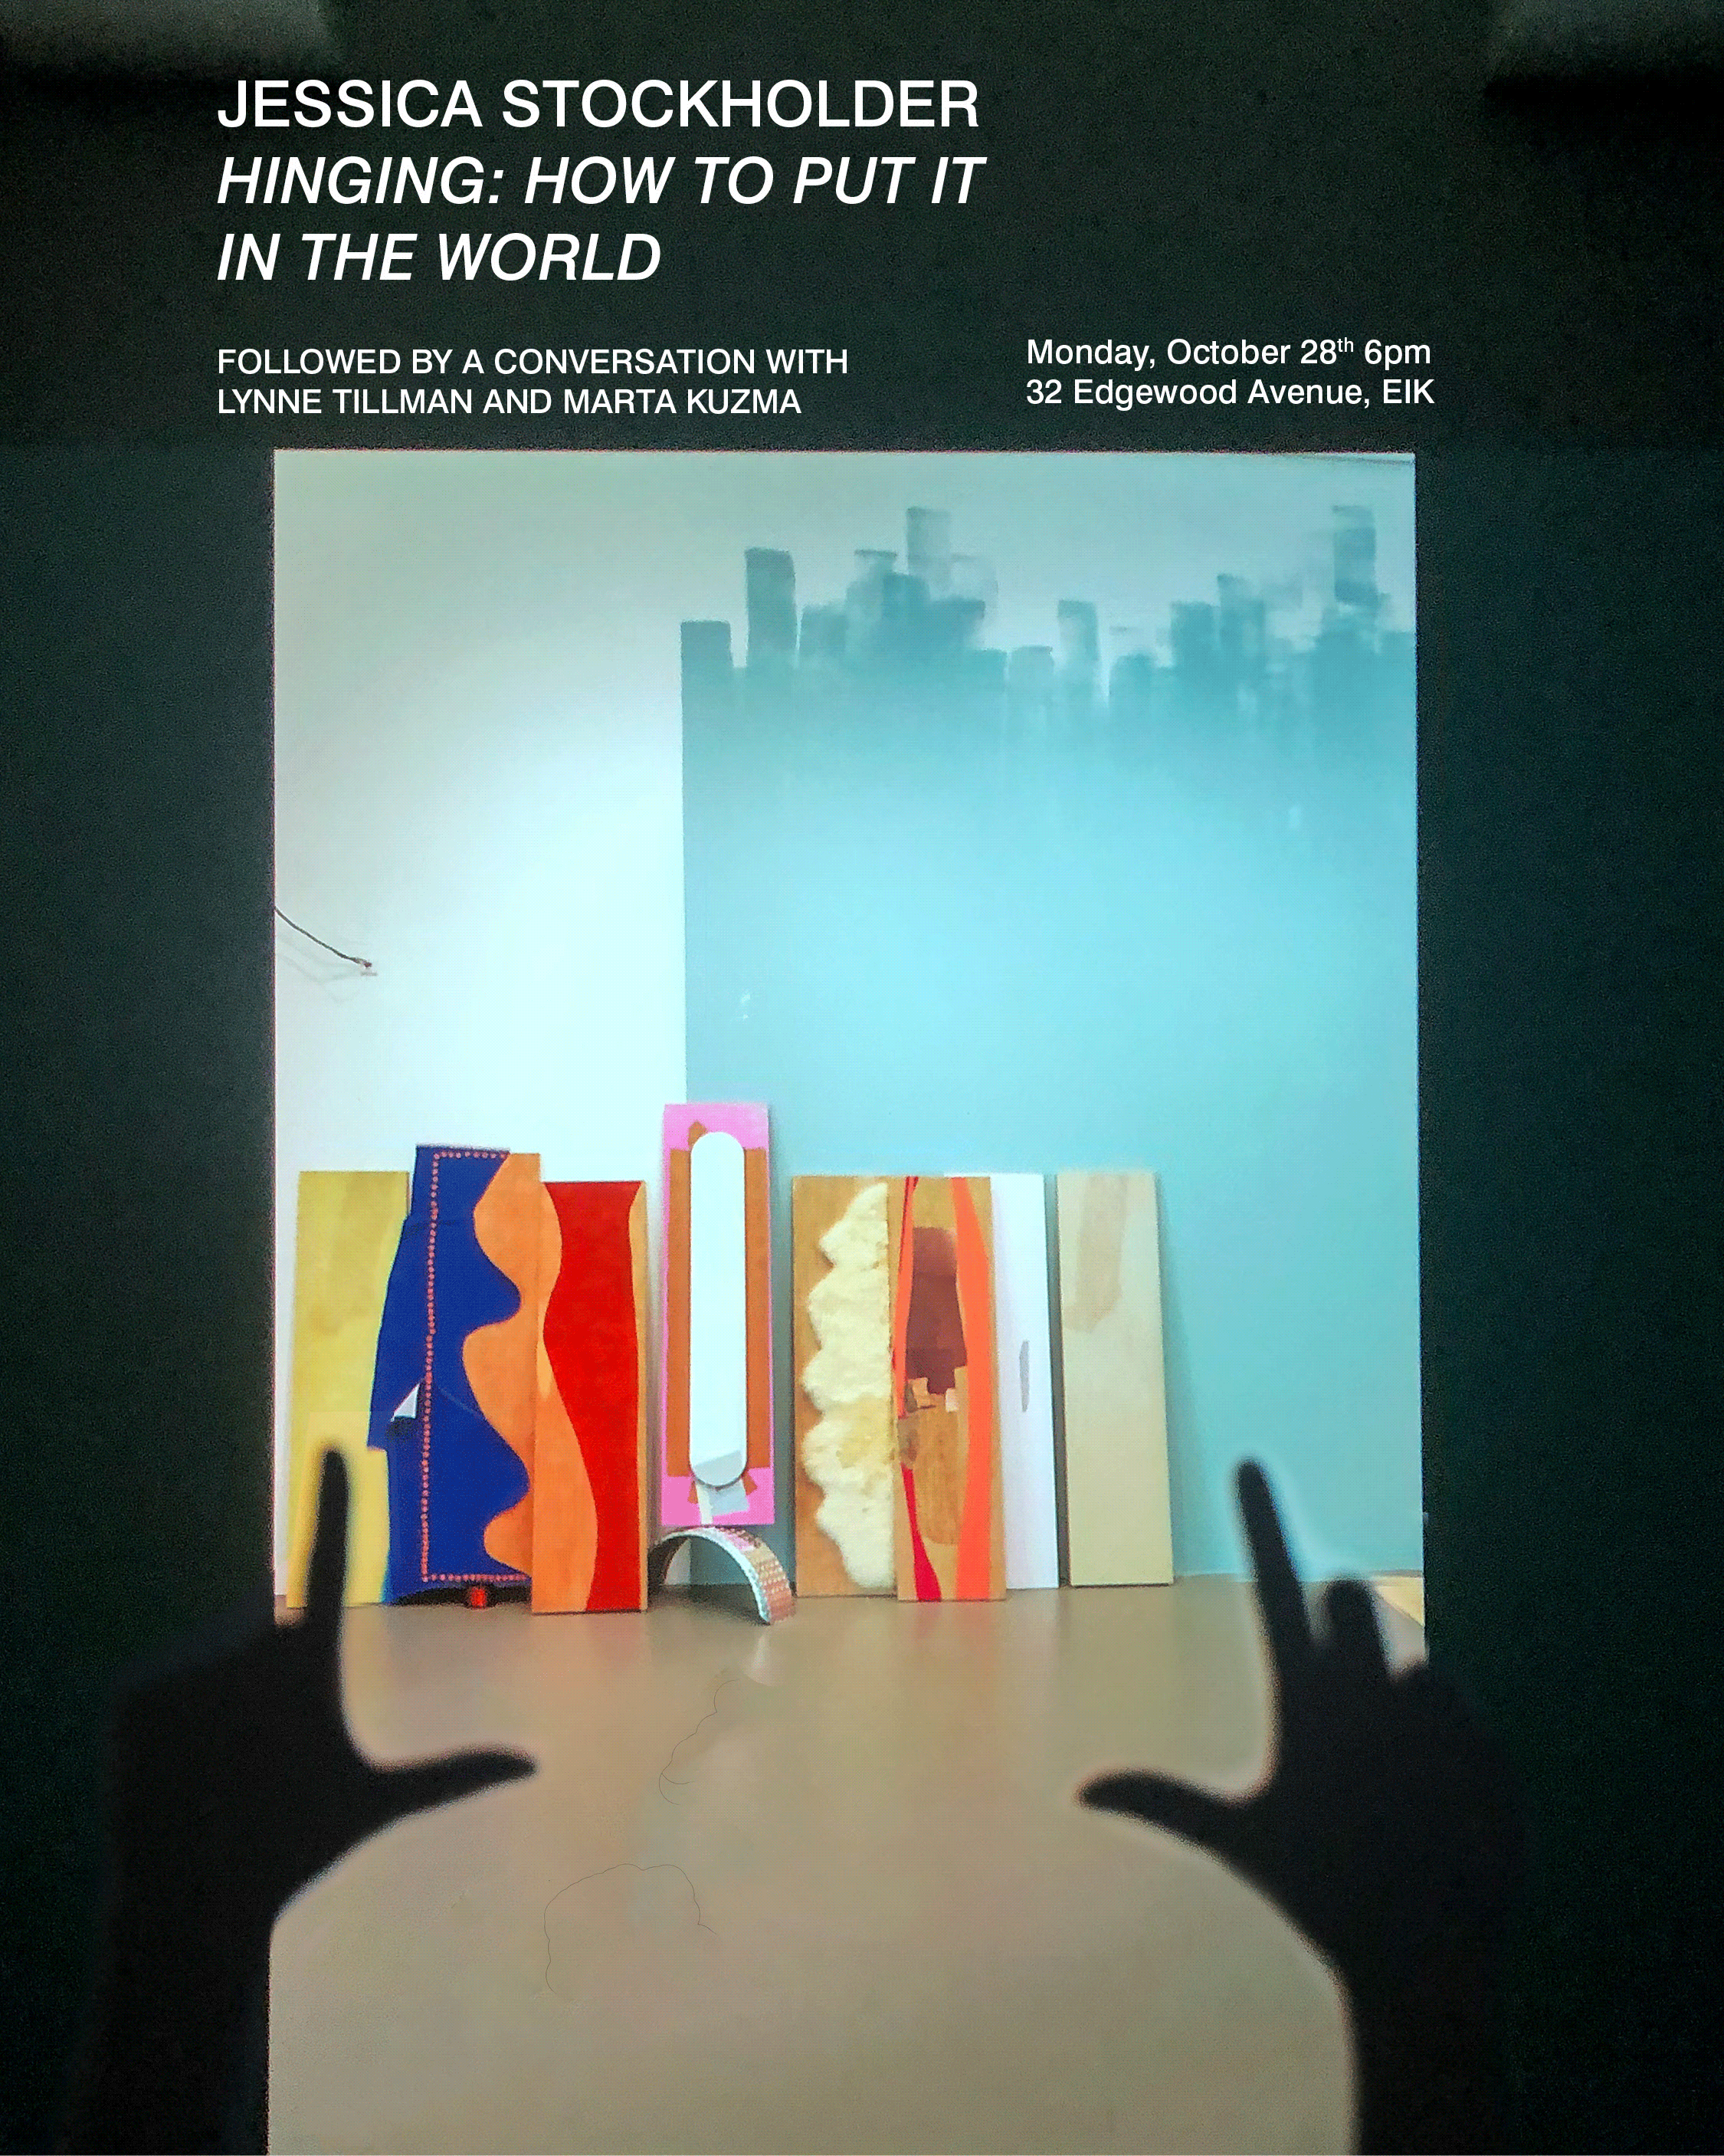 Poster for a lecture by Jessica Stockholder, featuring an image of Stockholder's work with a shadow hand pointing up towards it from the bottom of the frame.